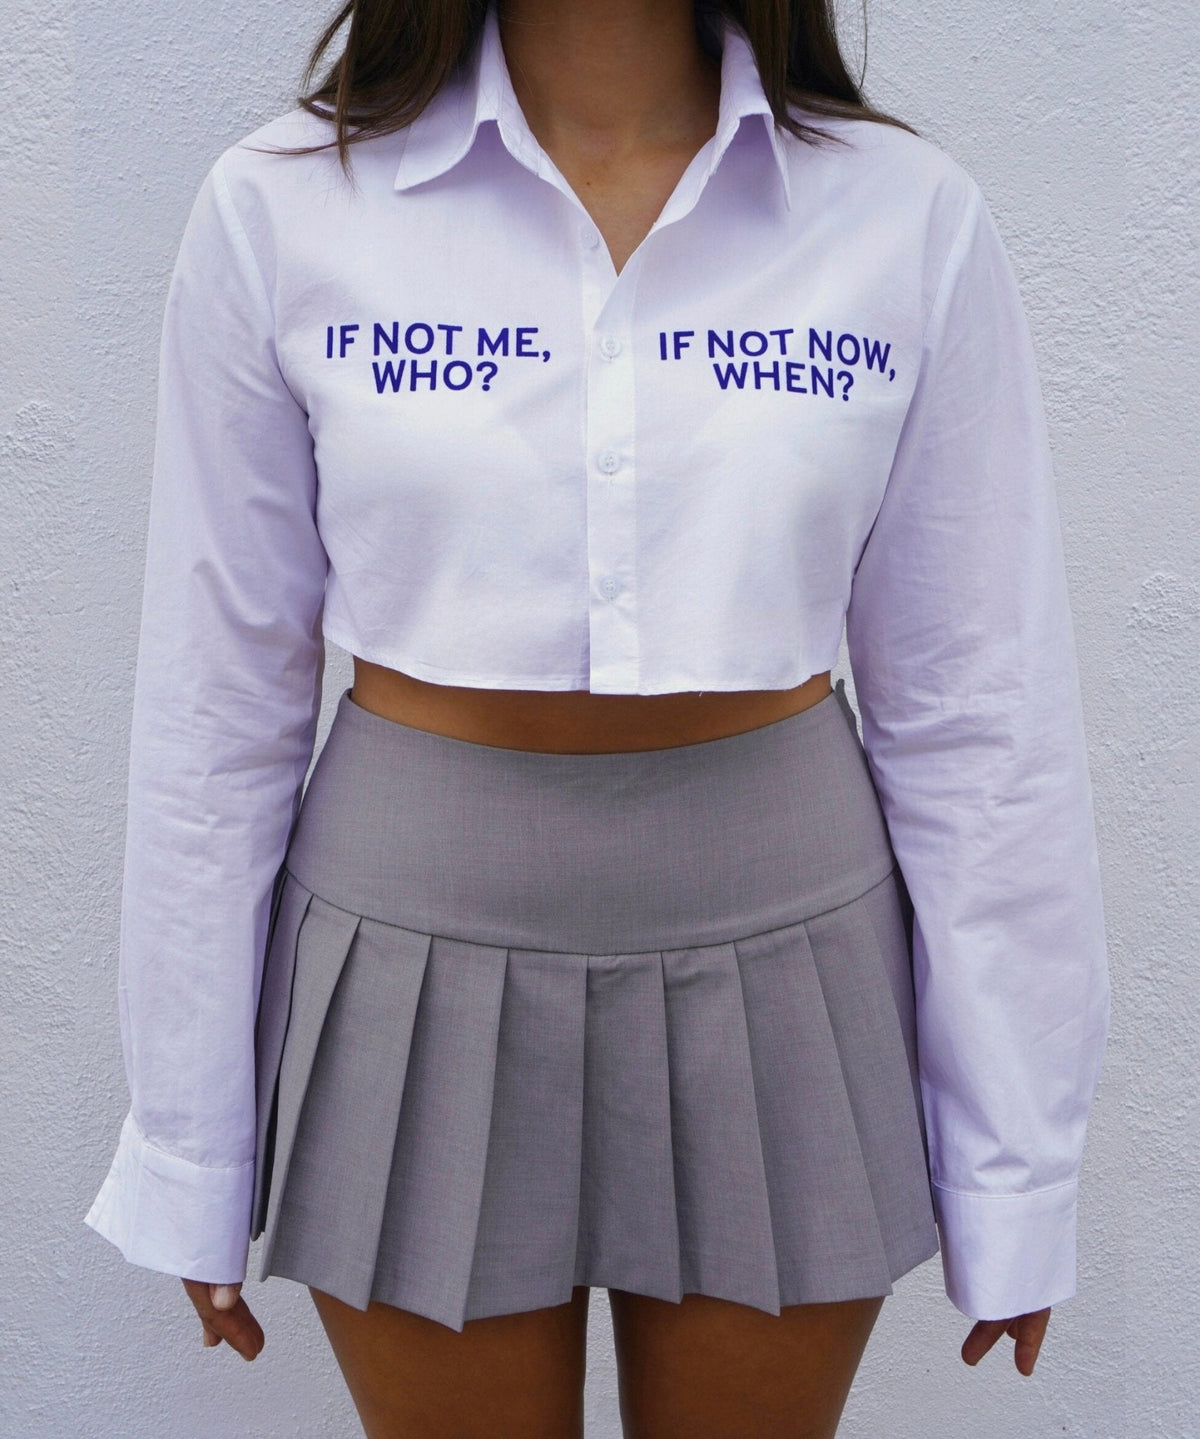 White Shirt &#39;IF NOT ME, WHO? IF NOT NOW, WHEN?&#39; - Electric Blue - OBLIVIOUS?